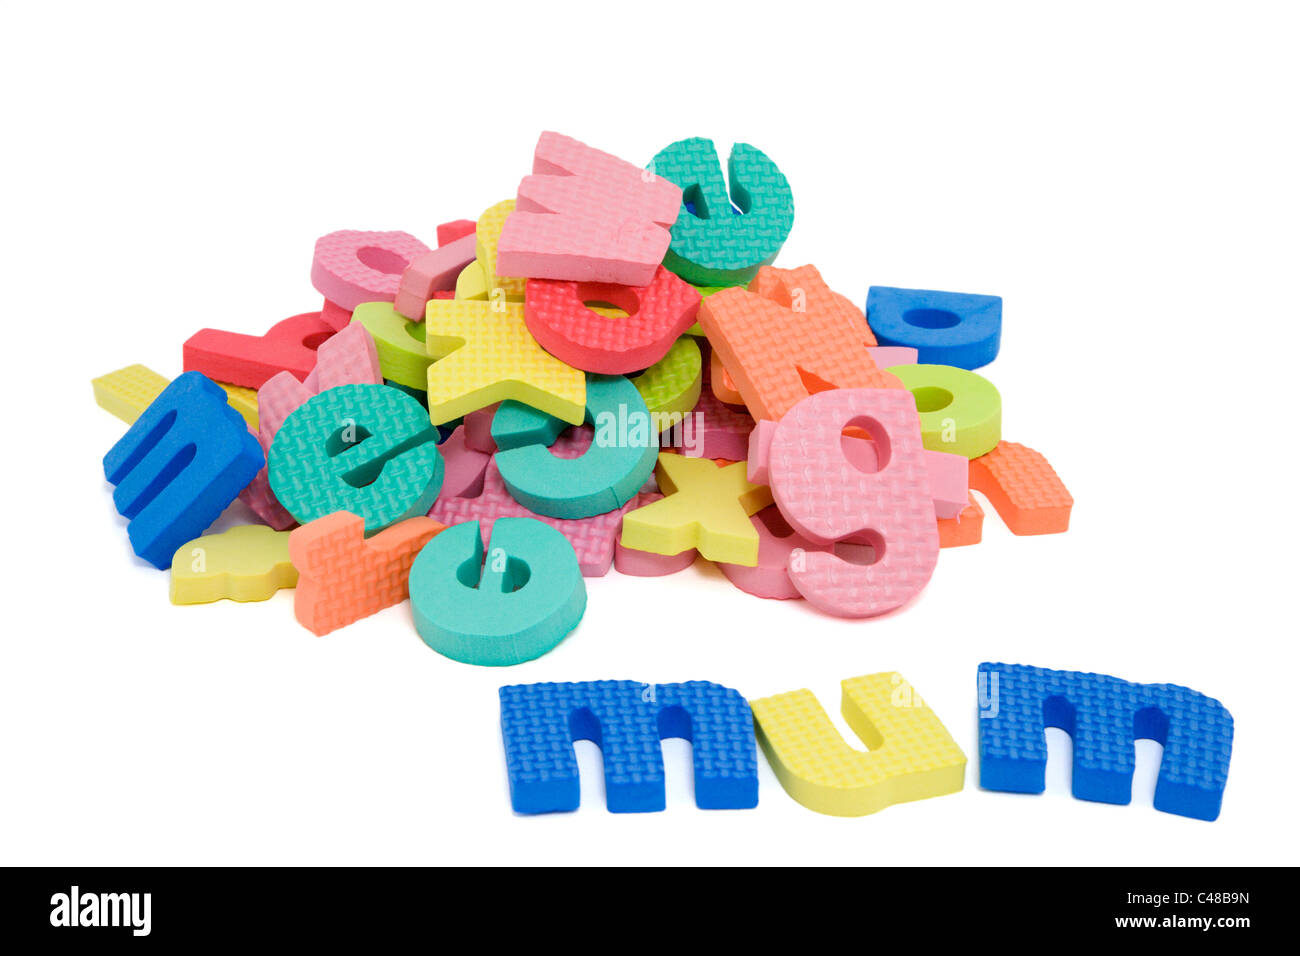 Foam letter Cut Out Stock Images & Pictures - Alamy